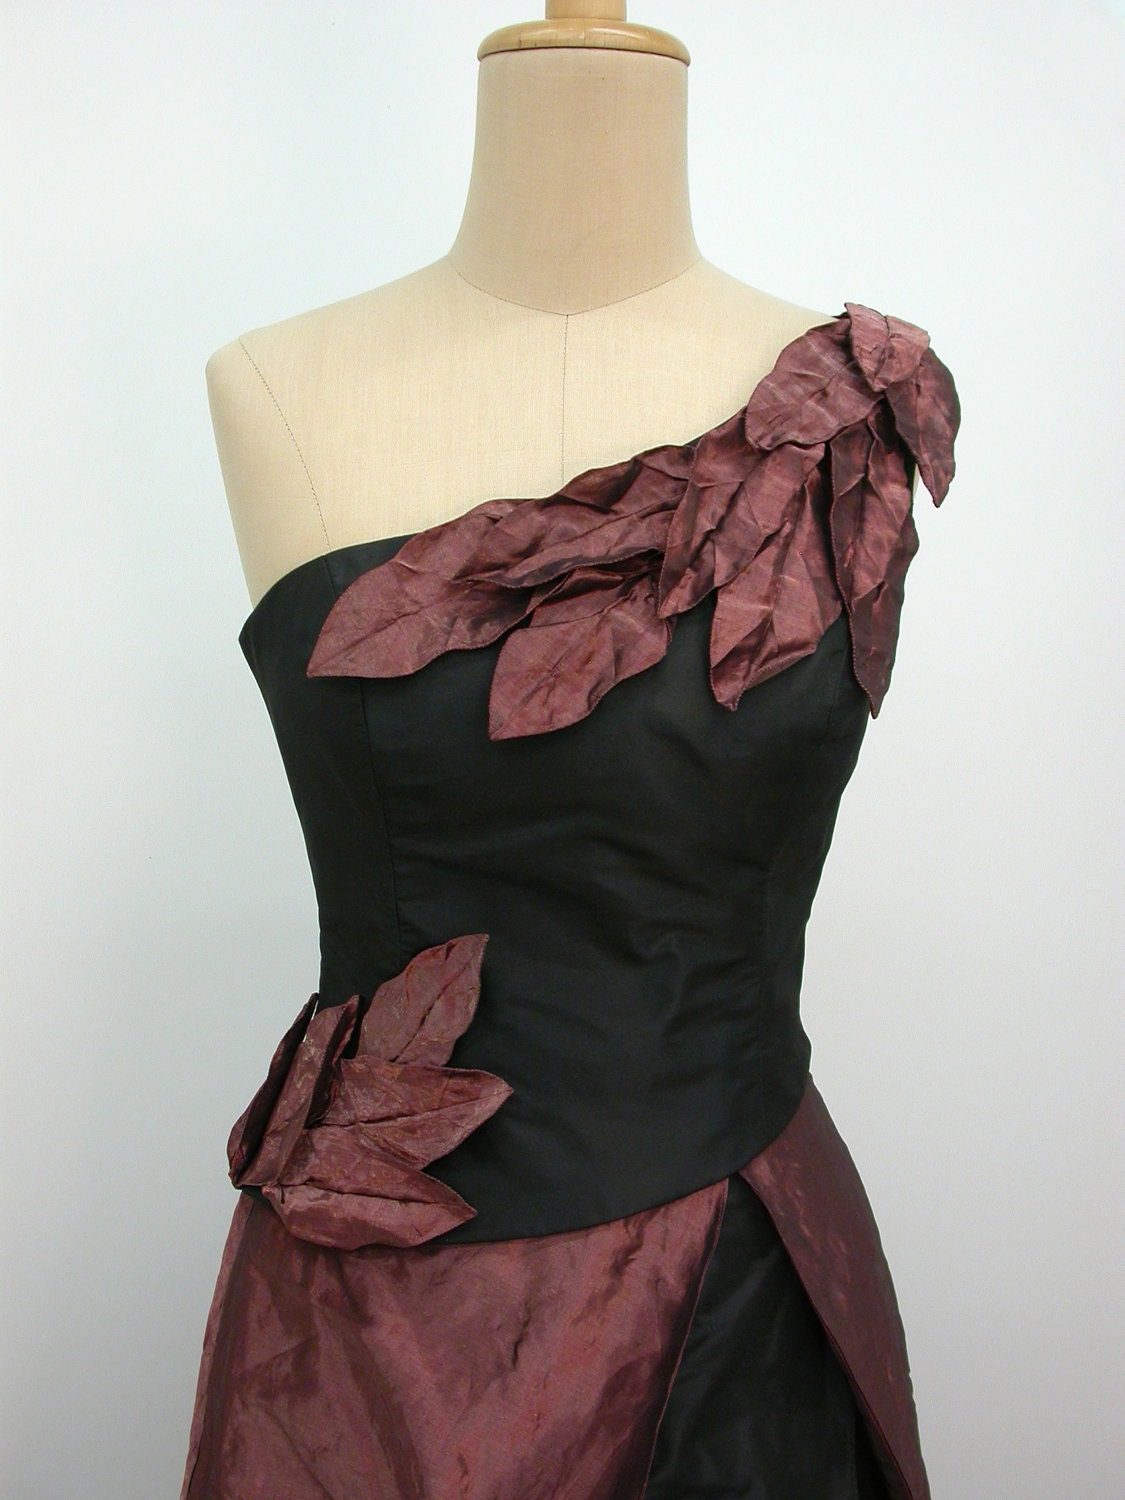 Autumn leaves ball gown - ValenCouture